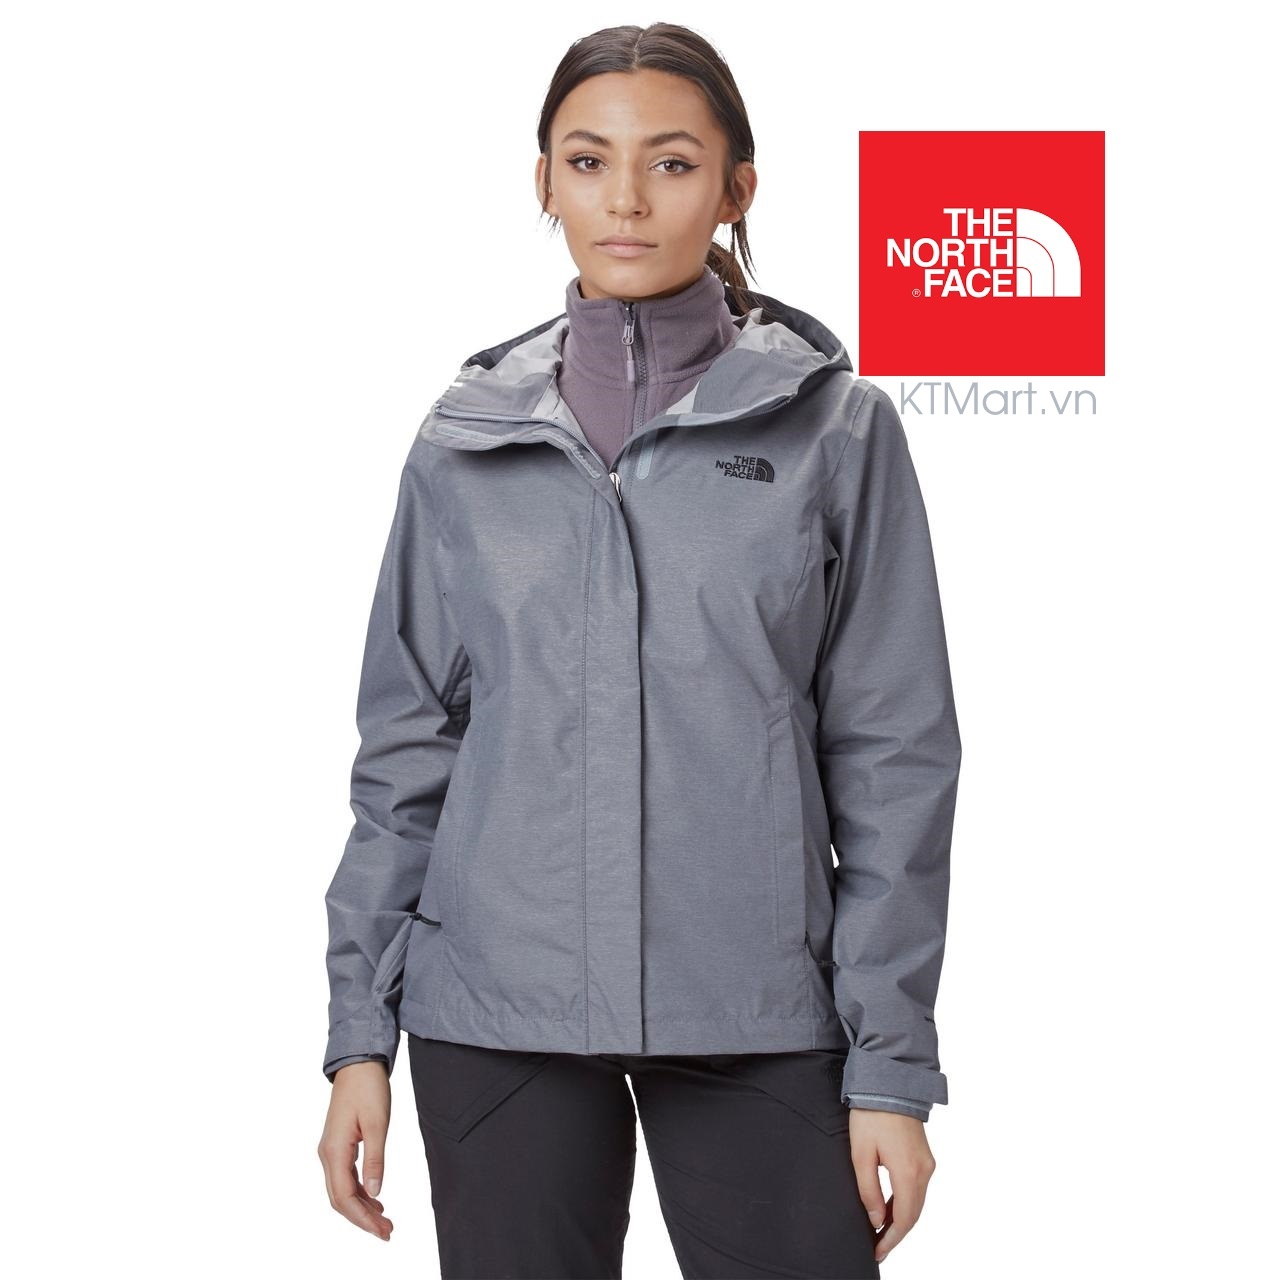 The North Face Women’s Venture 2 DryVent® Jacket The North Face size S